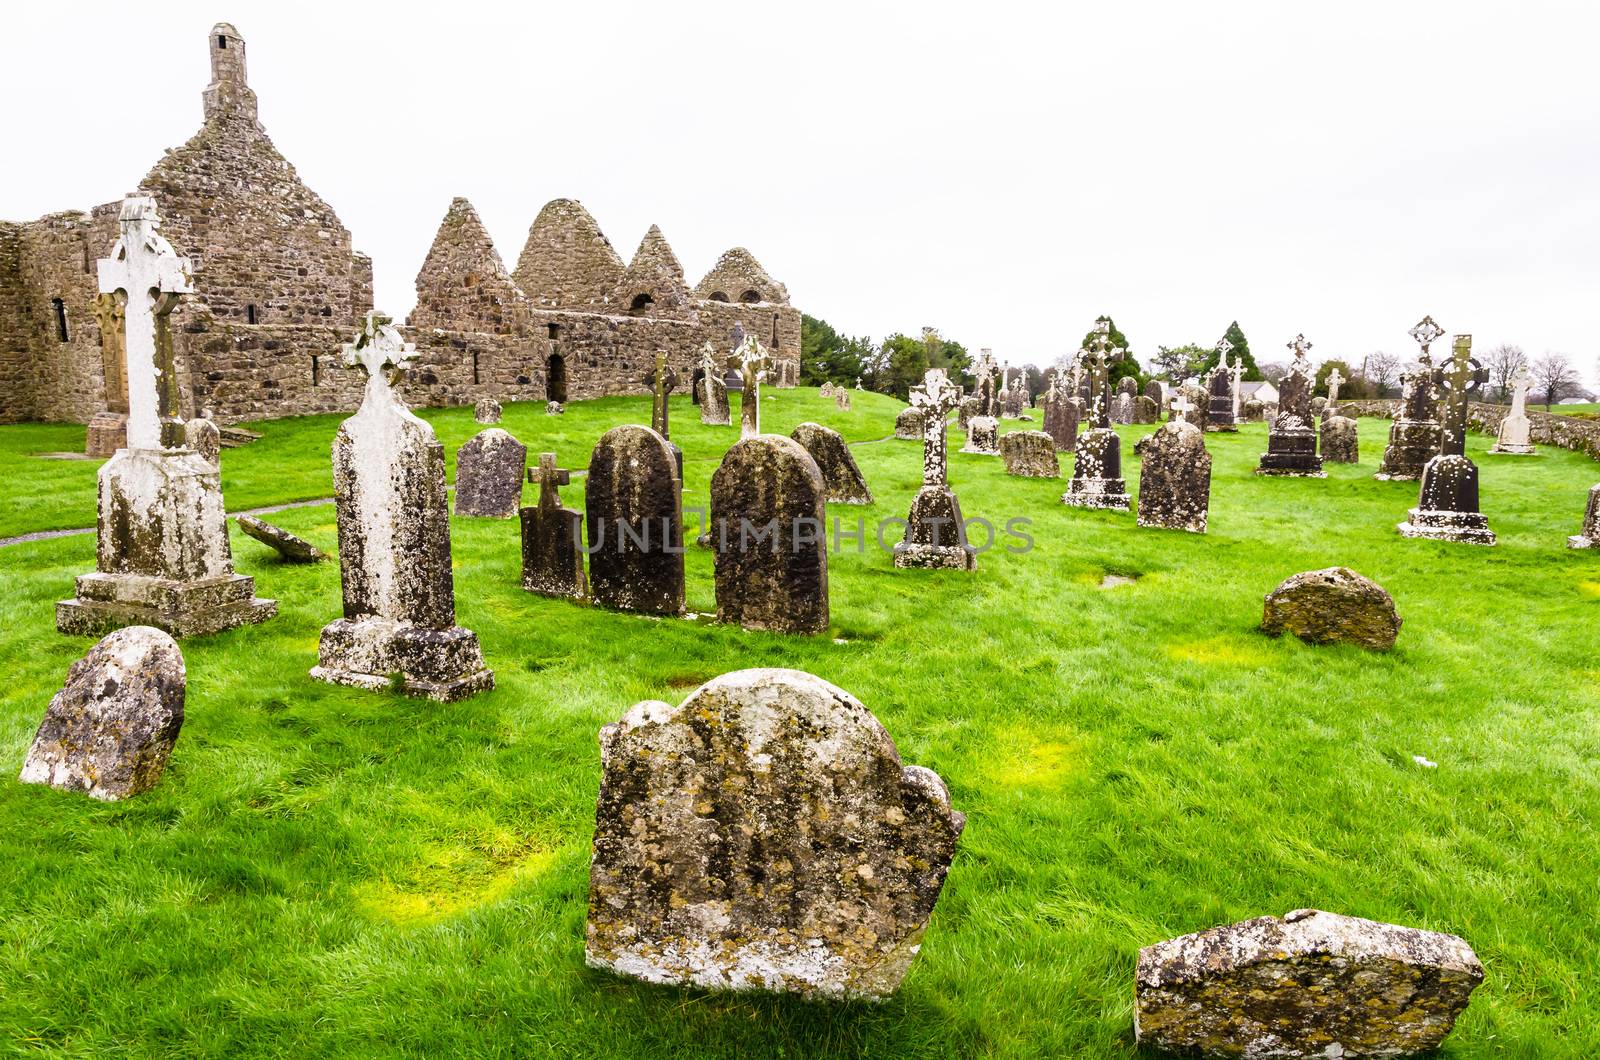 The ancient monastic city of Clonmacnoise with the typical crosses and graves surrounded by green grass, Ireland